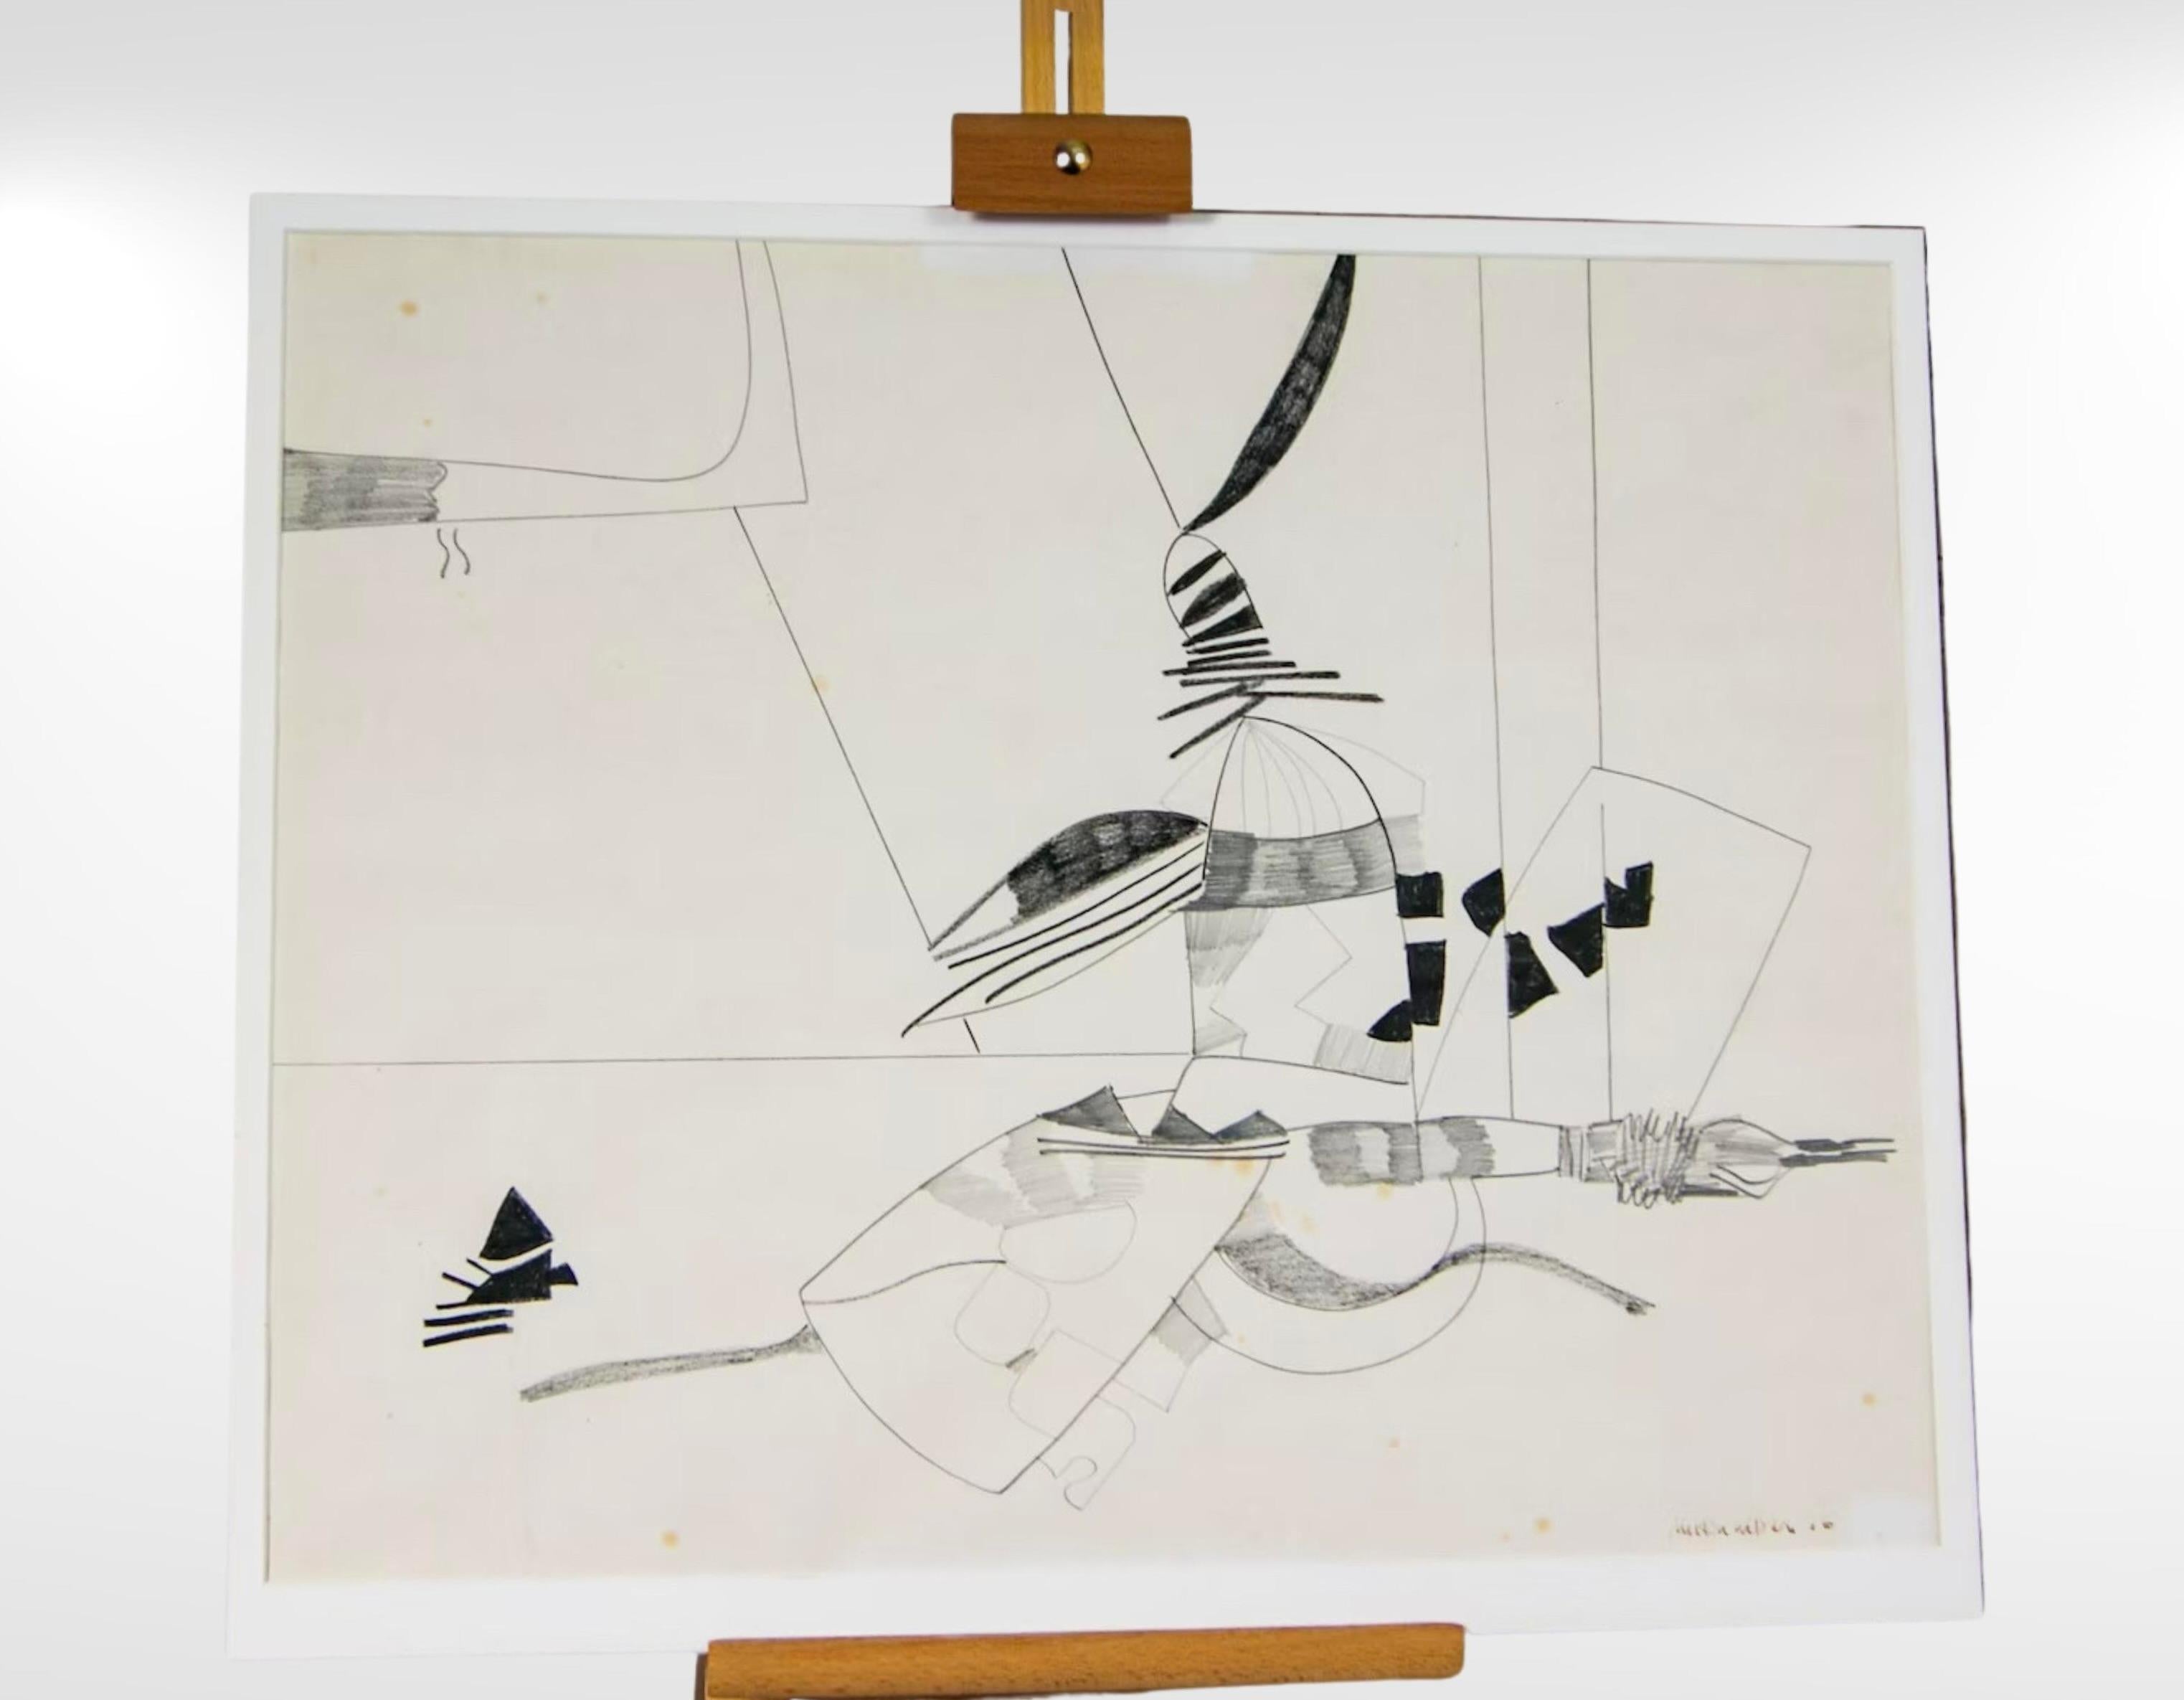 Original abstract drawing, pencil and graphite on artist paper, in colours black and white, by Oregon born artist Milton Wilson.
This is part of a selection of 3 works marked Oct 76 and numbered 5c.
Offered unframed on a white cardboard mount.